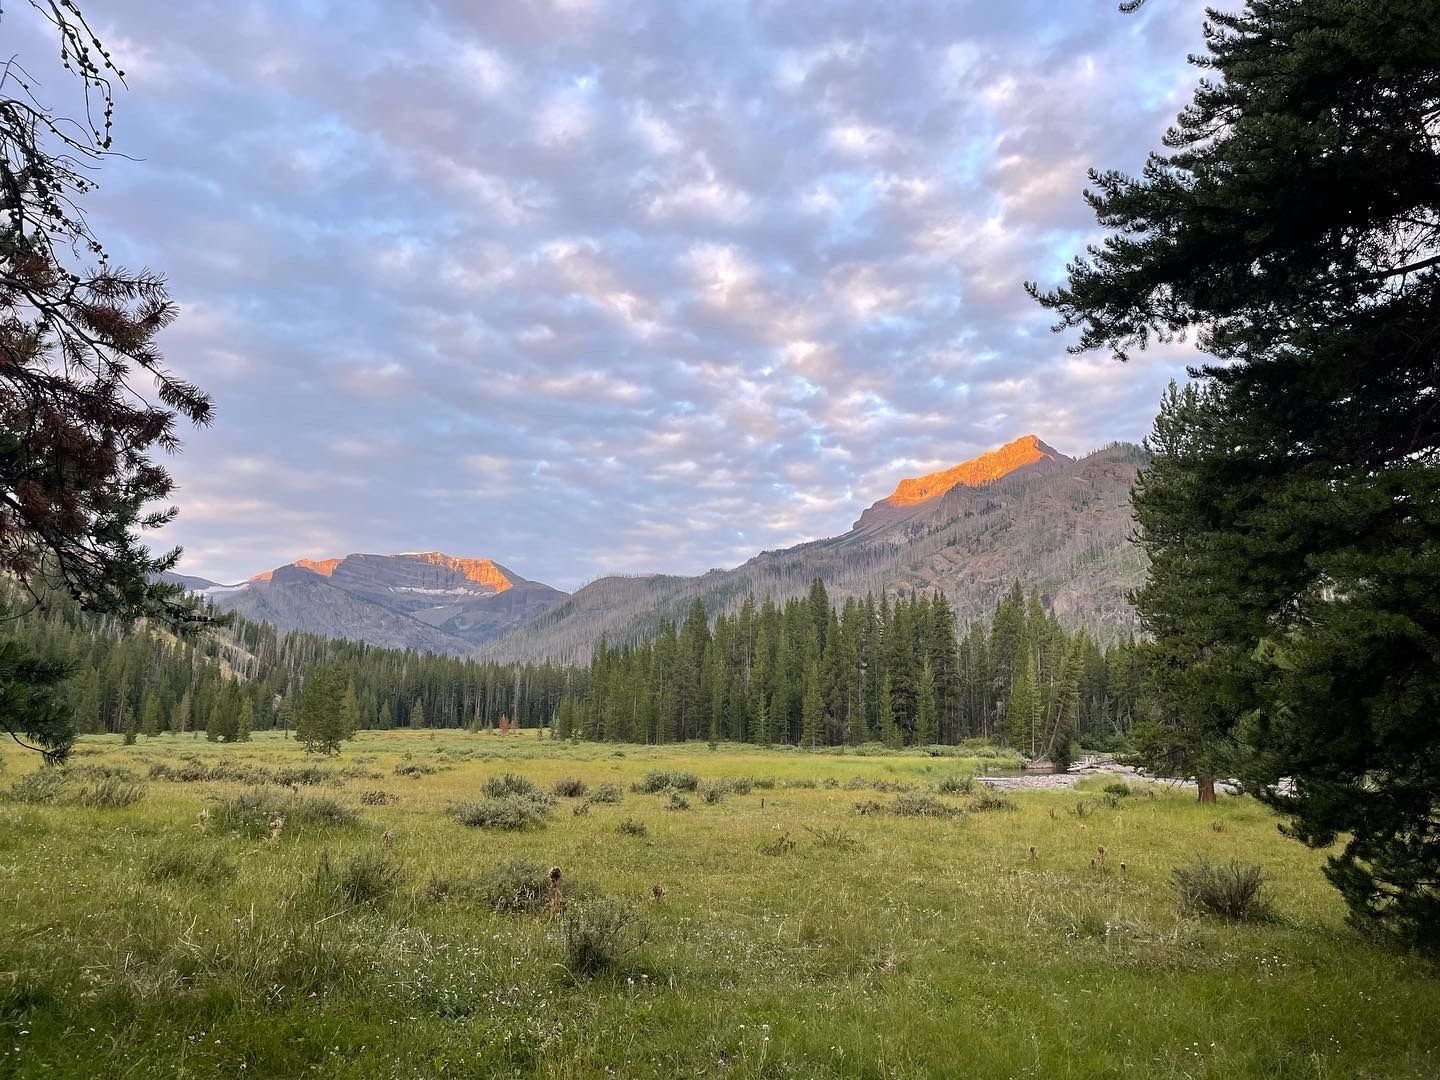 A beautiful meadow with mountain peaks in the background, with the sunset hitting them.